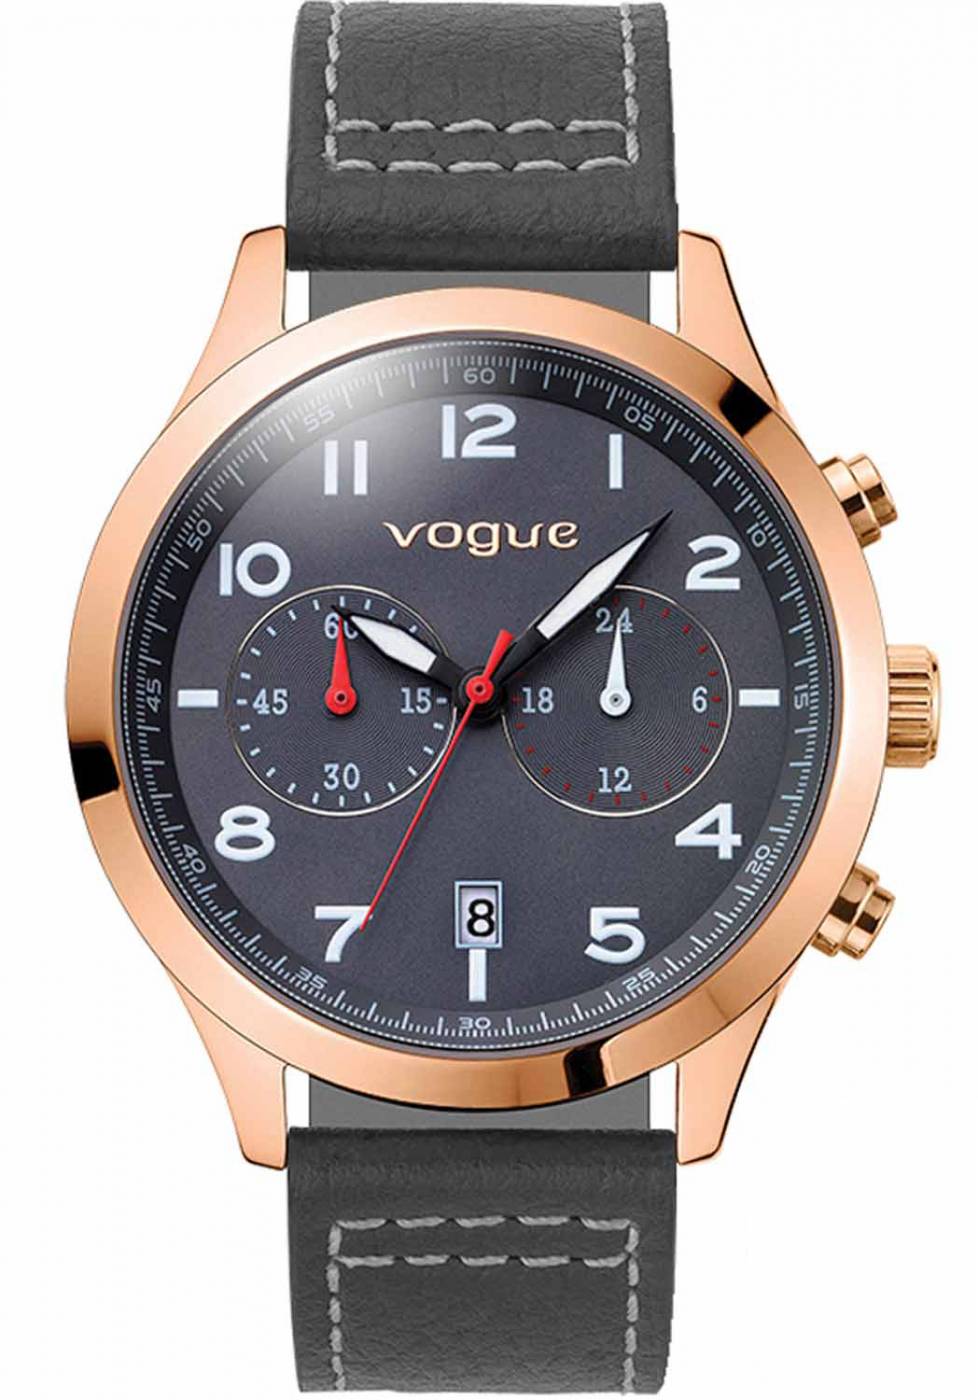 VOGUE WATCH GREY LEATHER STRAP CHRONOGRAPH